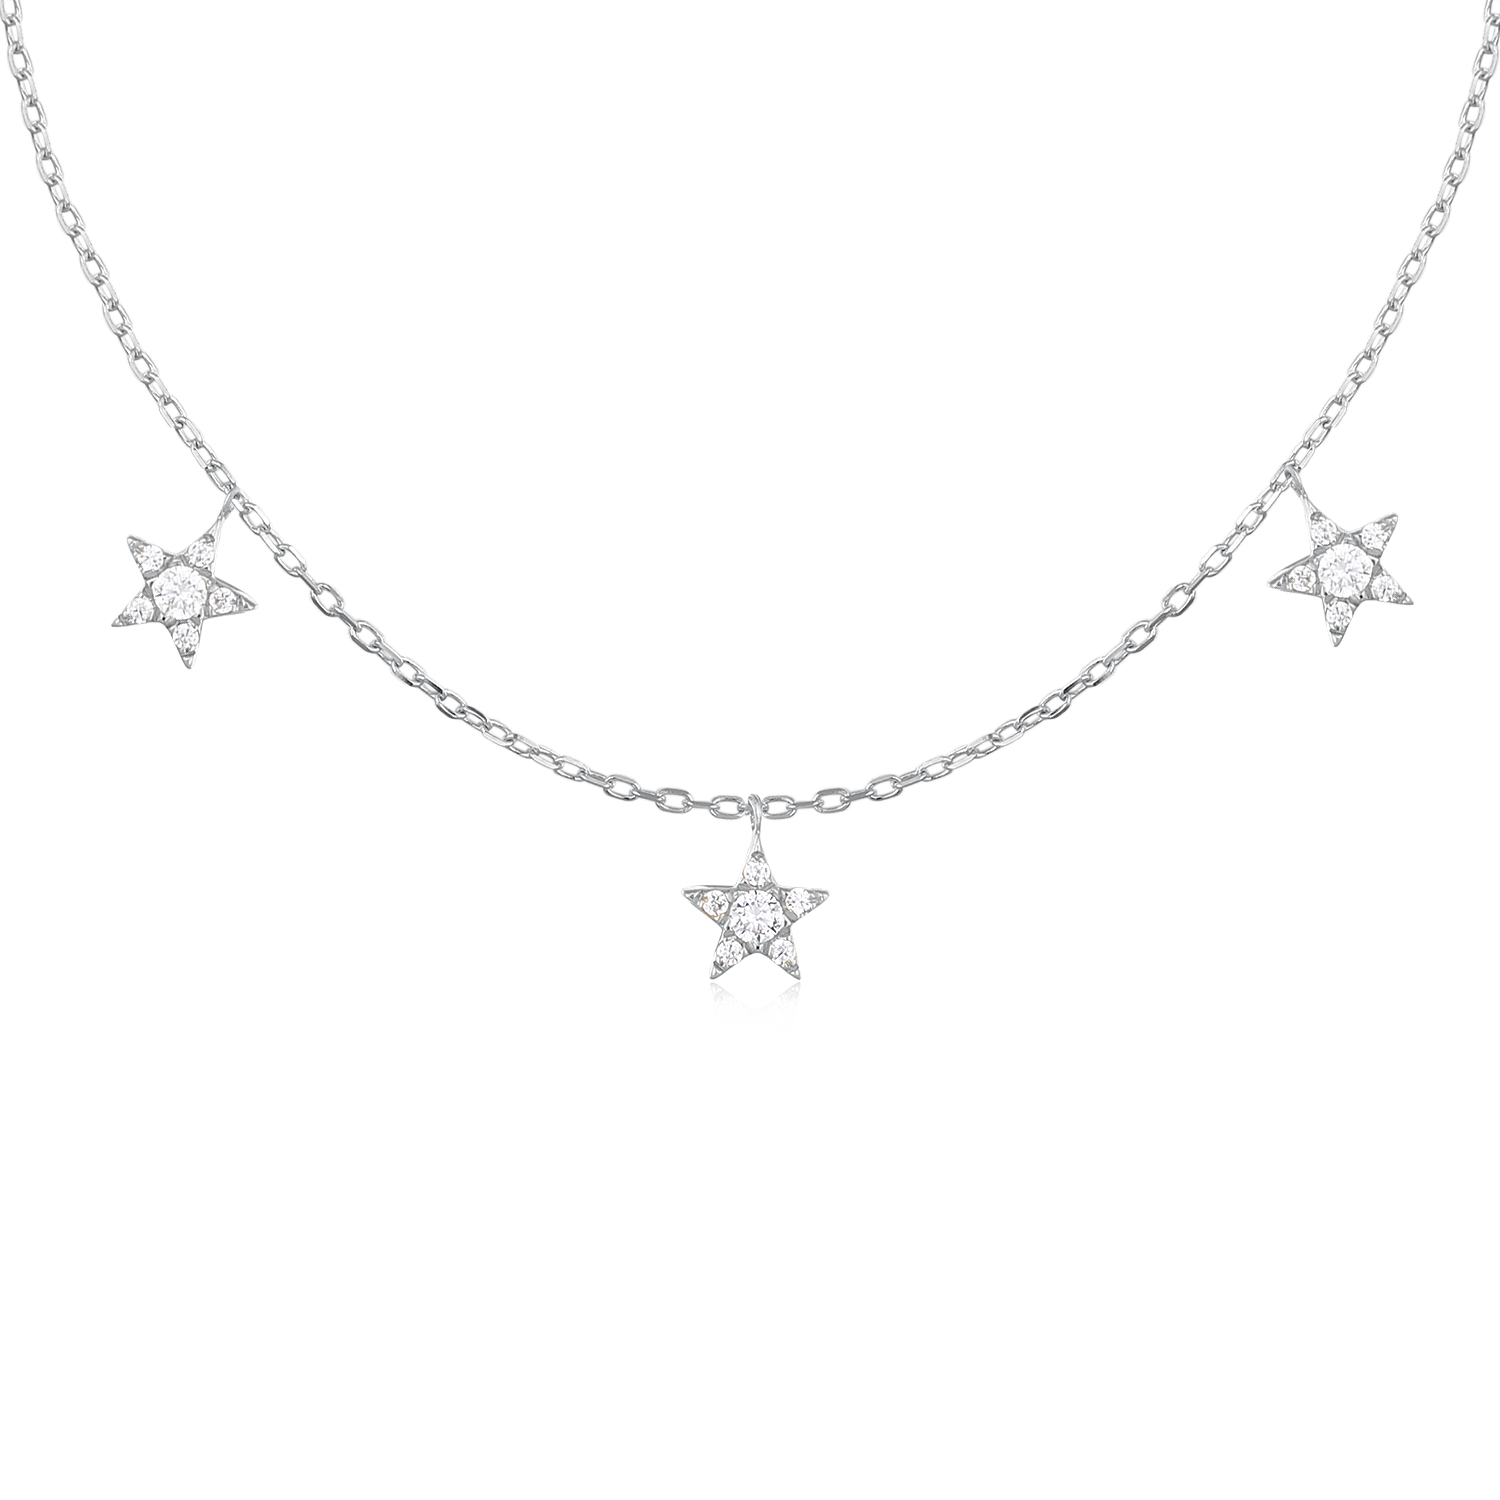 Floating Star Necklace